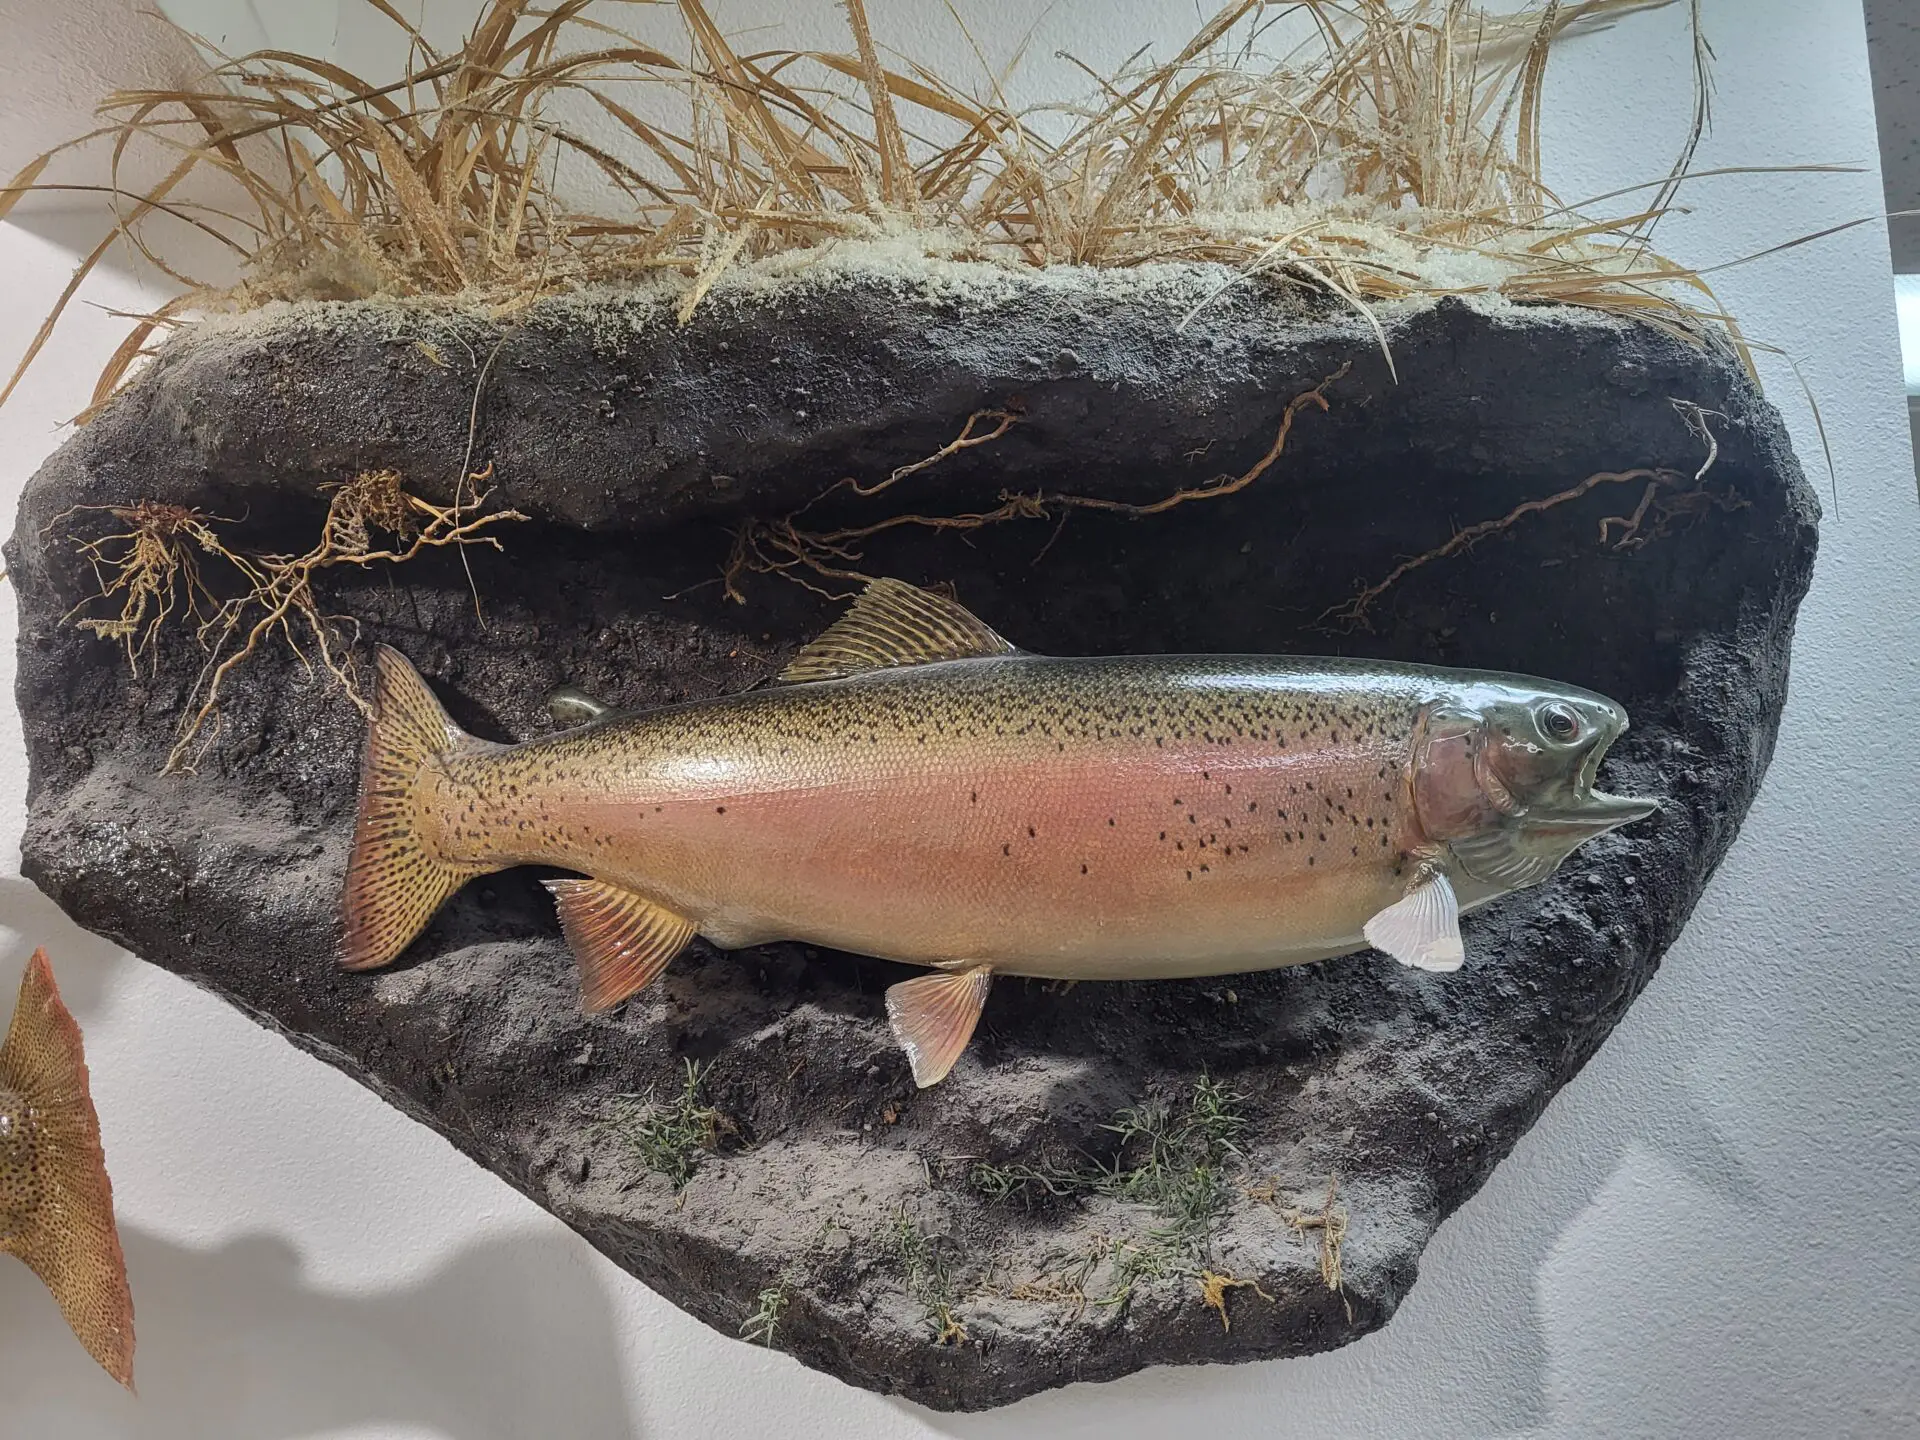 This fish taxidermy is placed on a rock for display